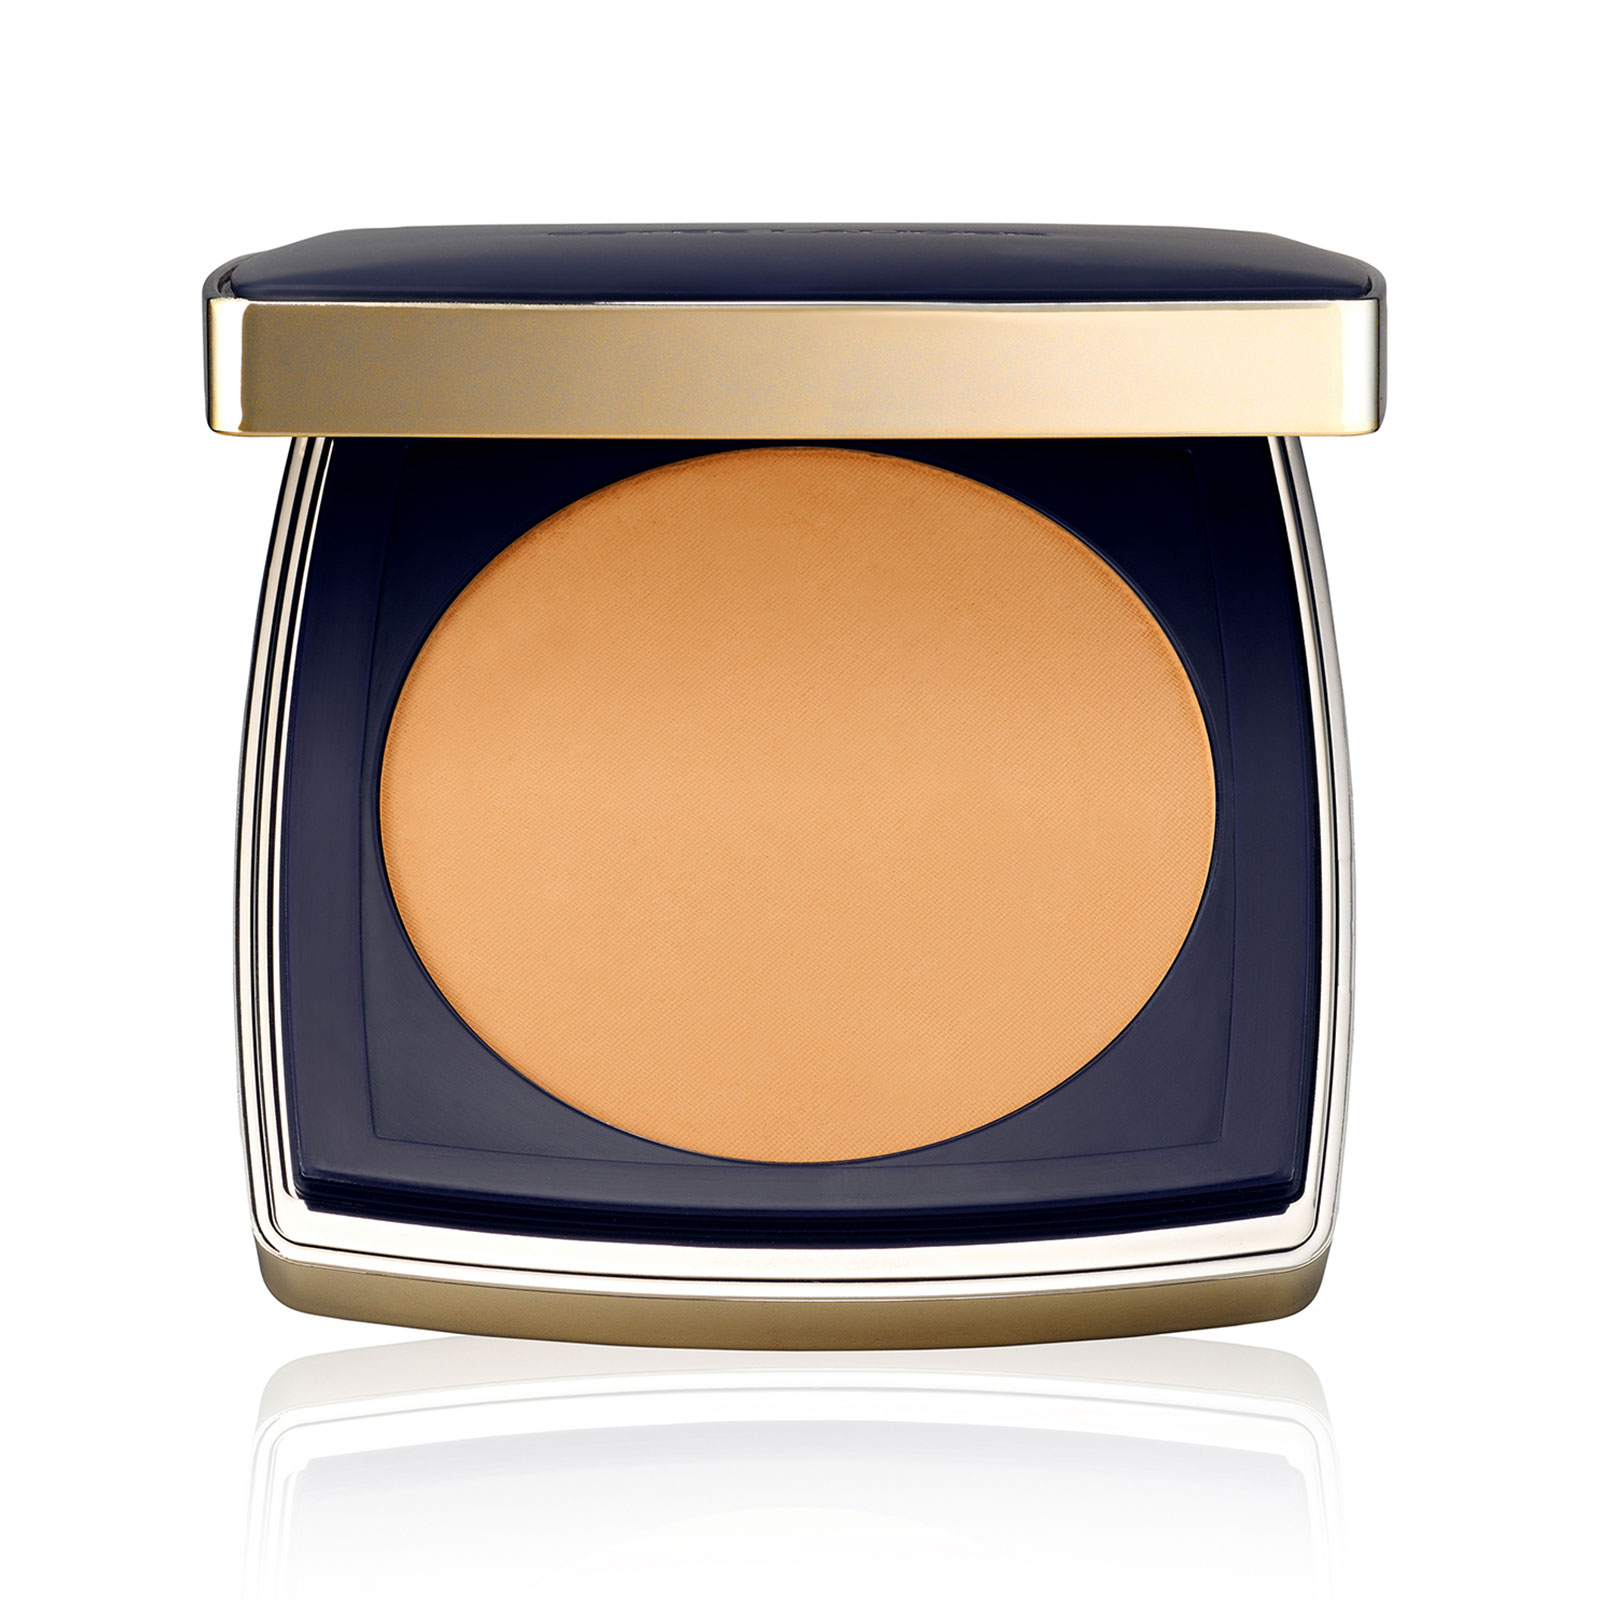 Estee Lauder Double Wear Stay-In-Place Matte Powder Foundation Spf10 12G 6C1 Rich Cocoa